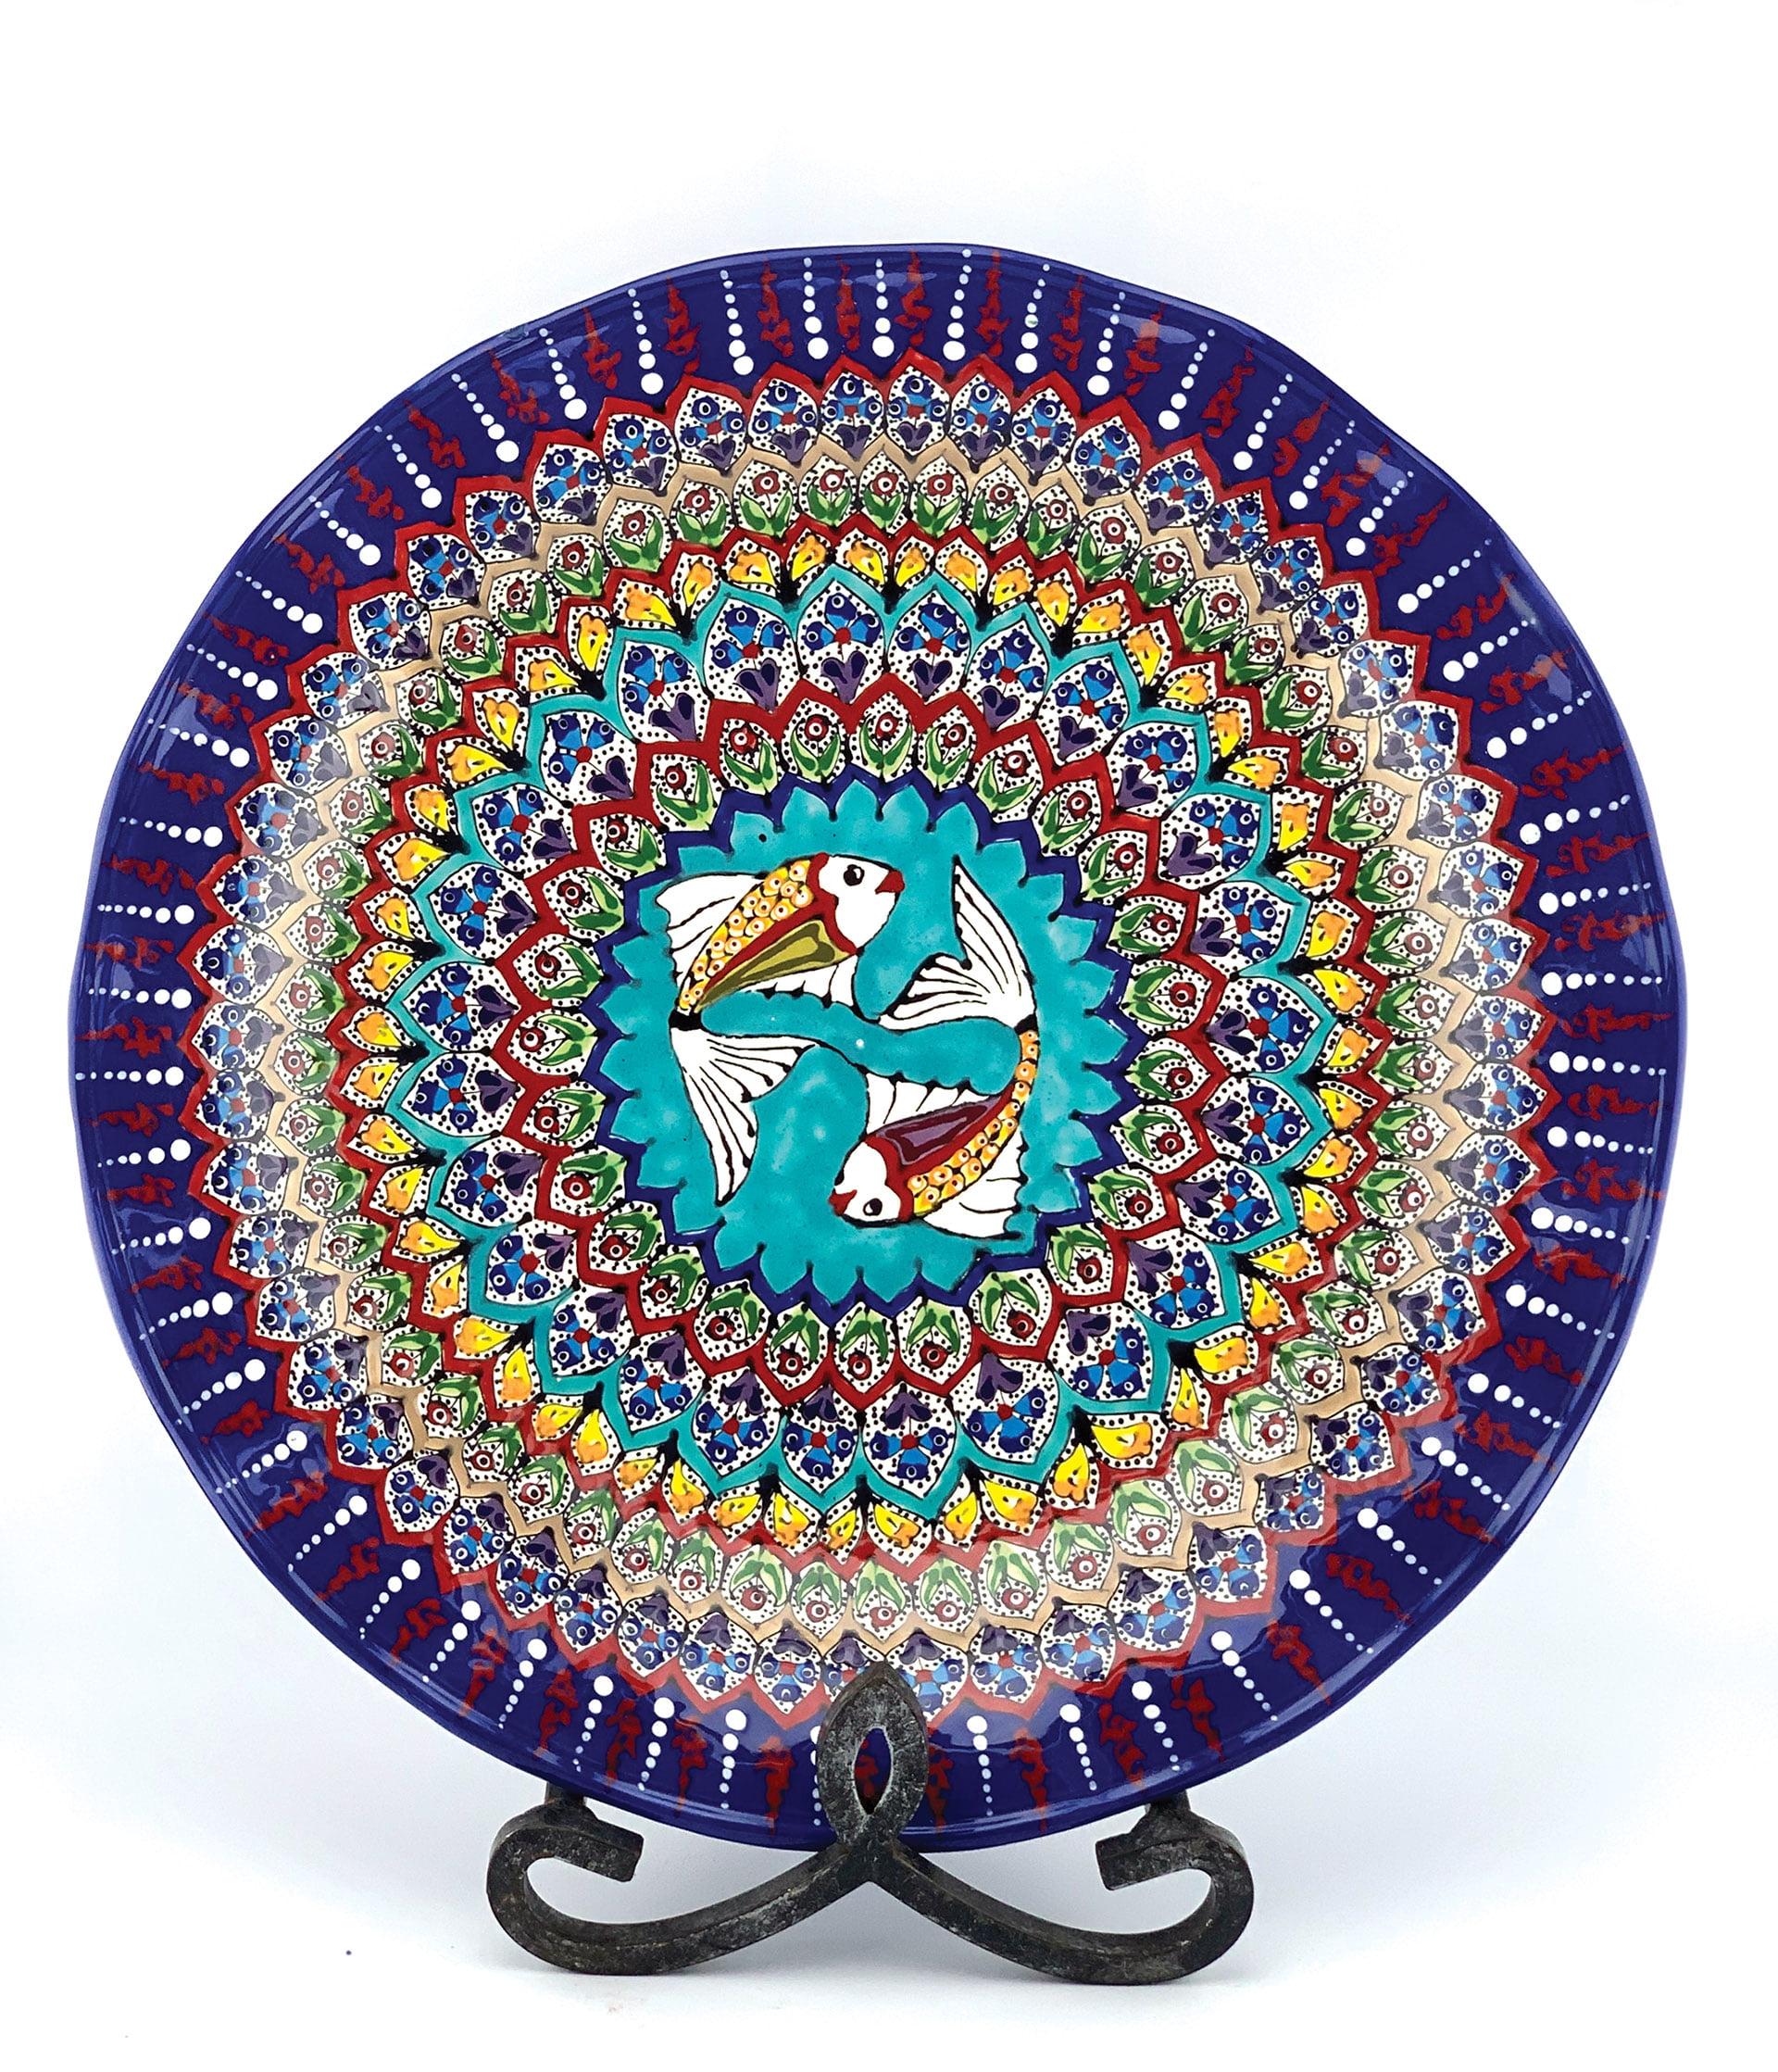 A plate festooned with fish revisits Kurdish rug motifs from the artist’s earliest memory.